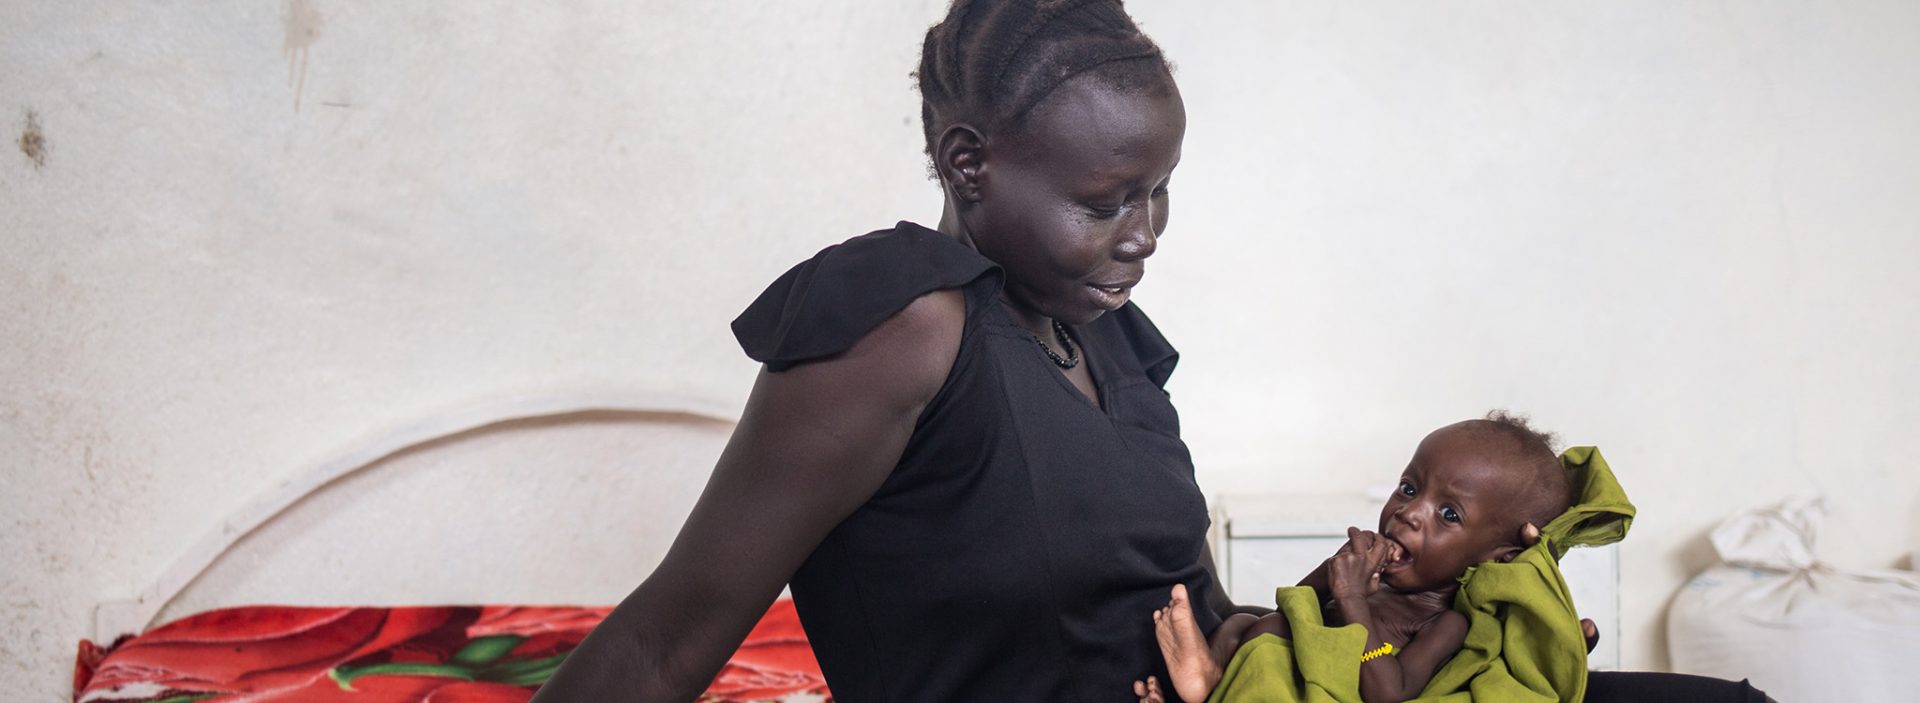 Nyajepe, a South Sudanese refugee, is happy to see the improvement in her child after they received support from Action Against Hunger.